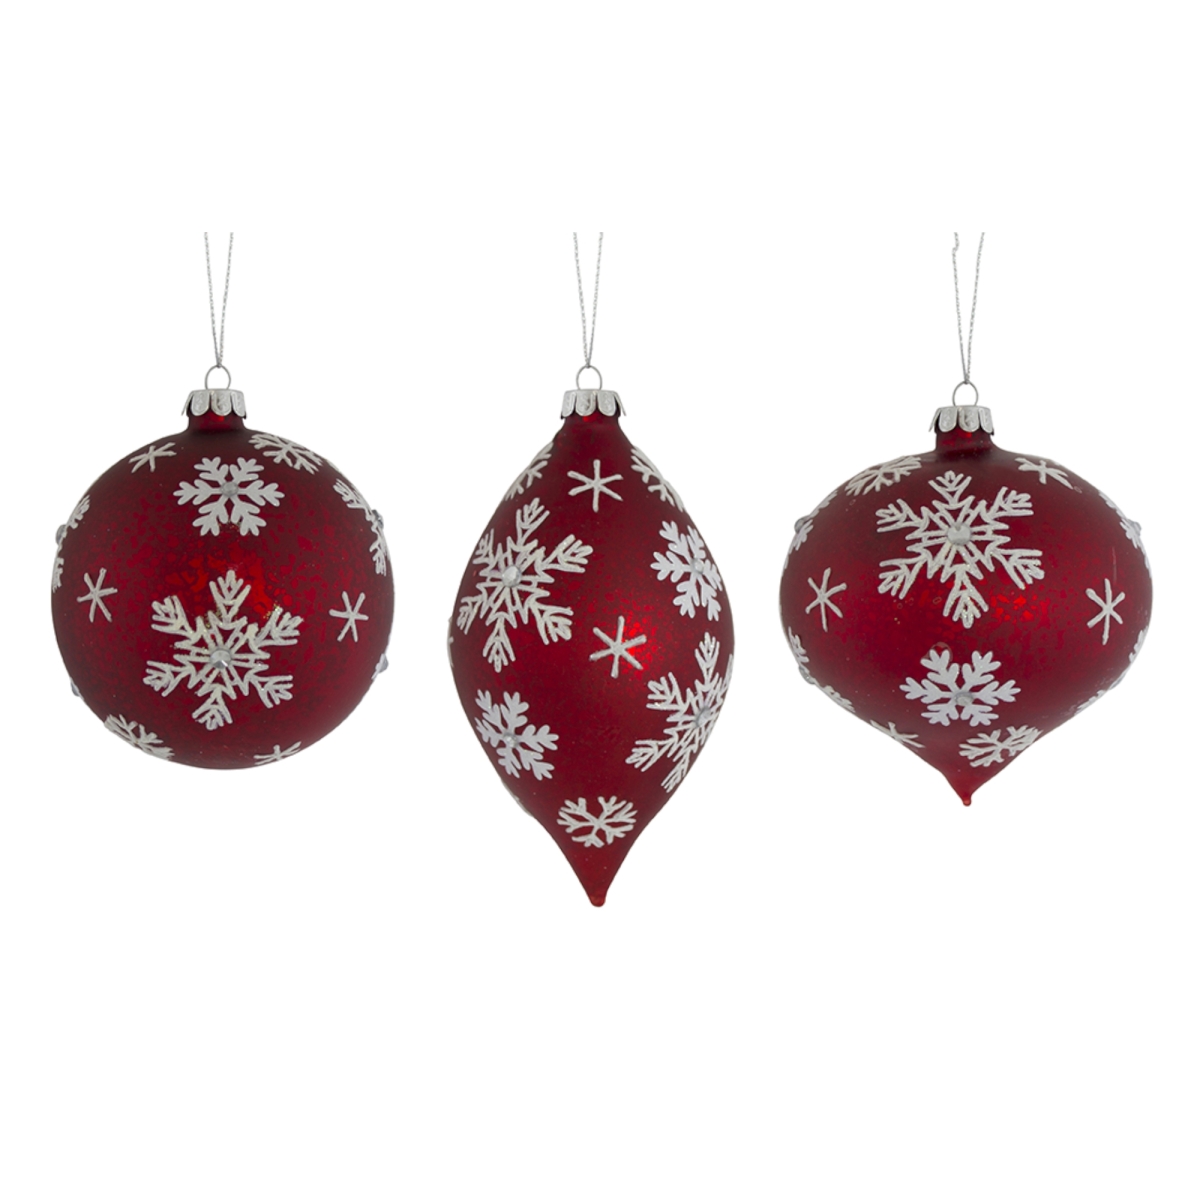 72348ds 6.25 X 5.5 X 7.5 In. Glass Snowflake Ornament, Red & White - Set Of 6